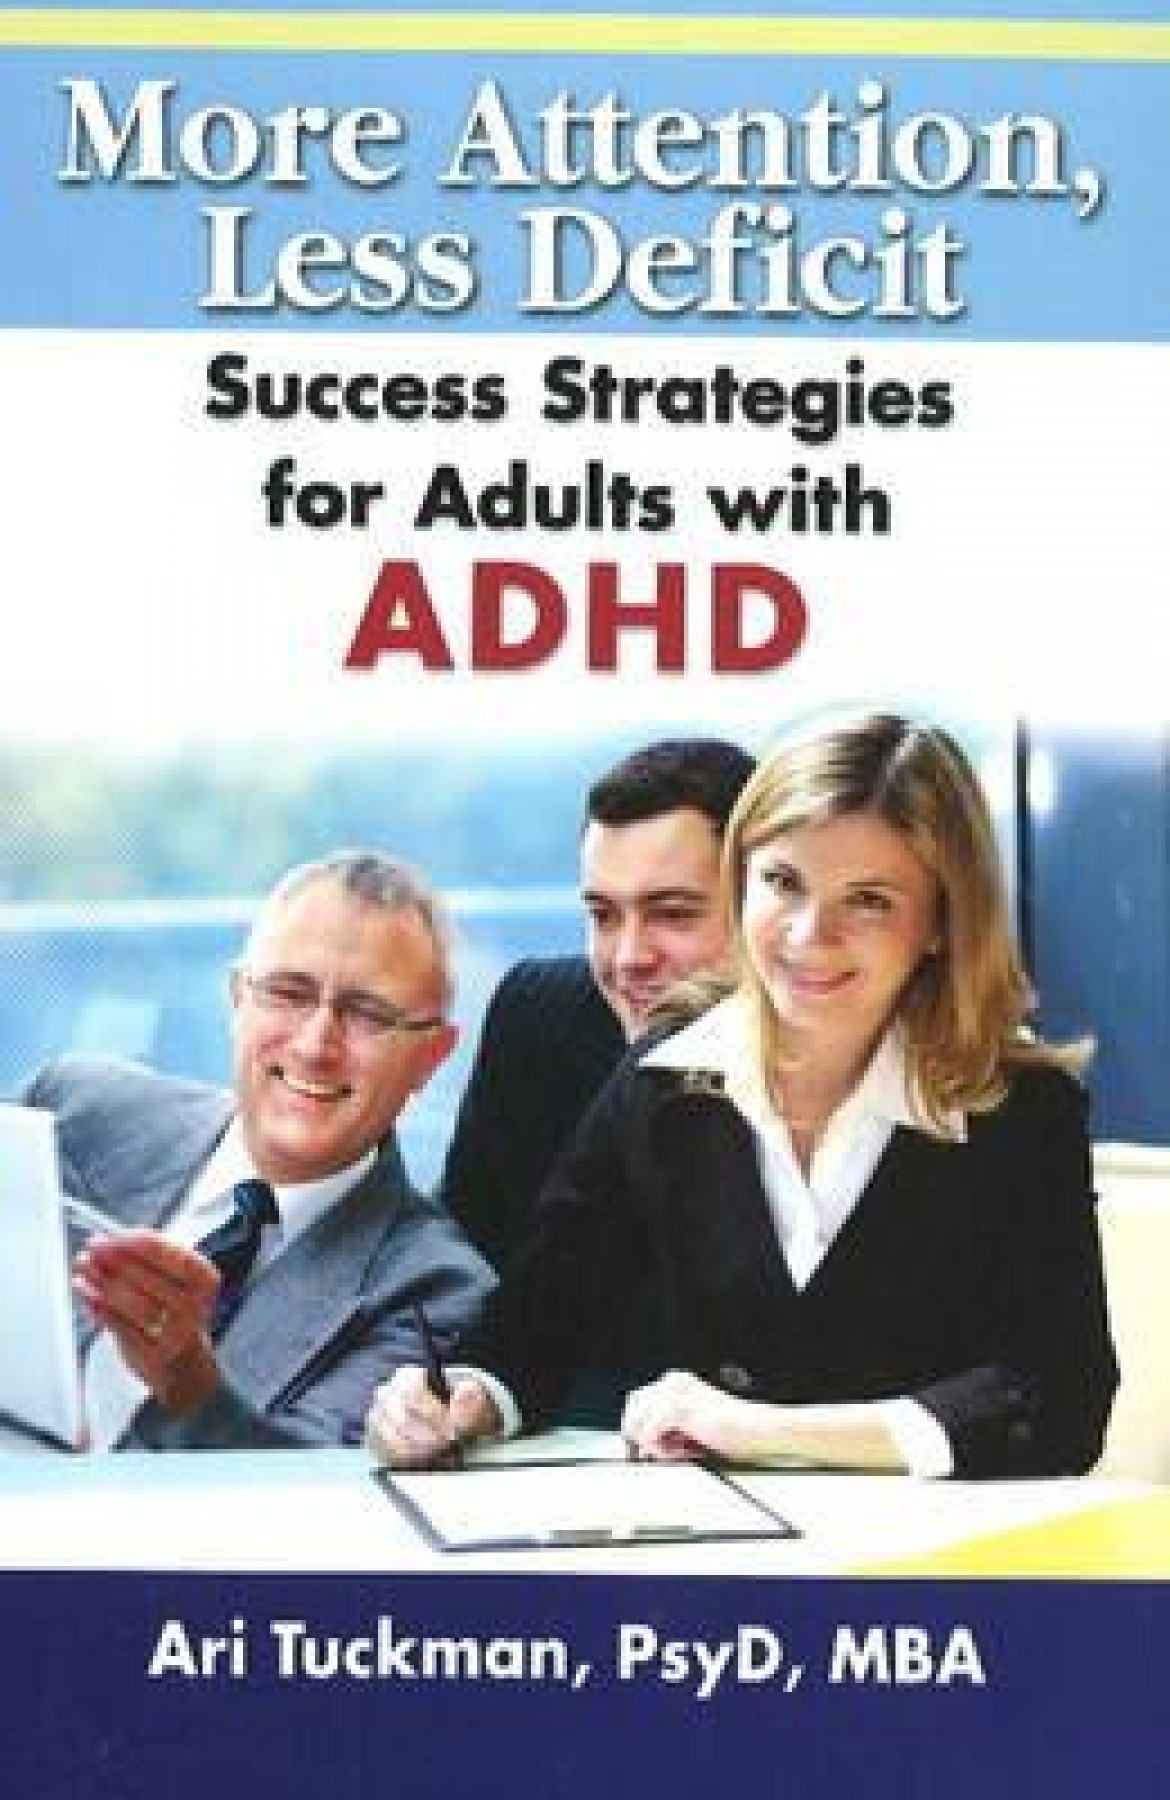 More attention, less deficit: Success strategies for adults with ADHD